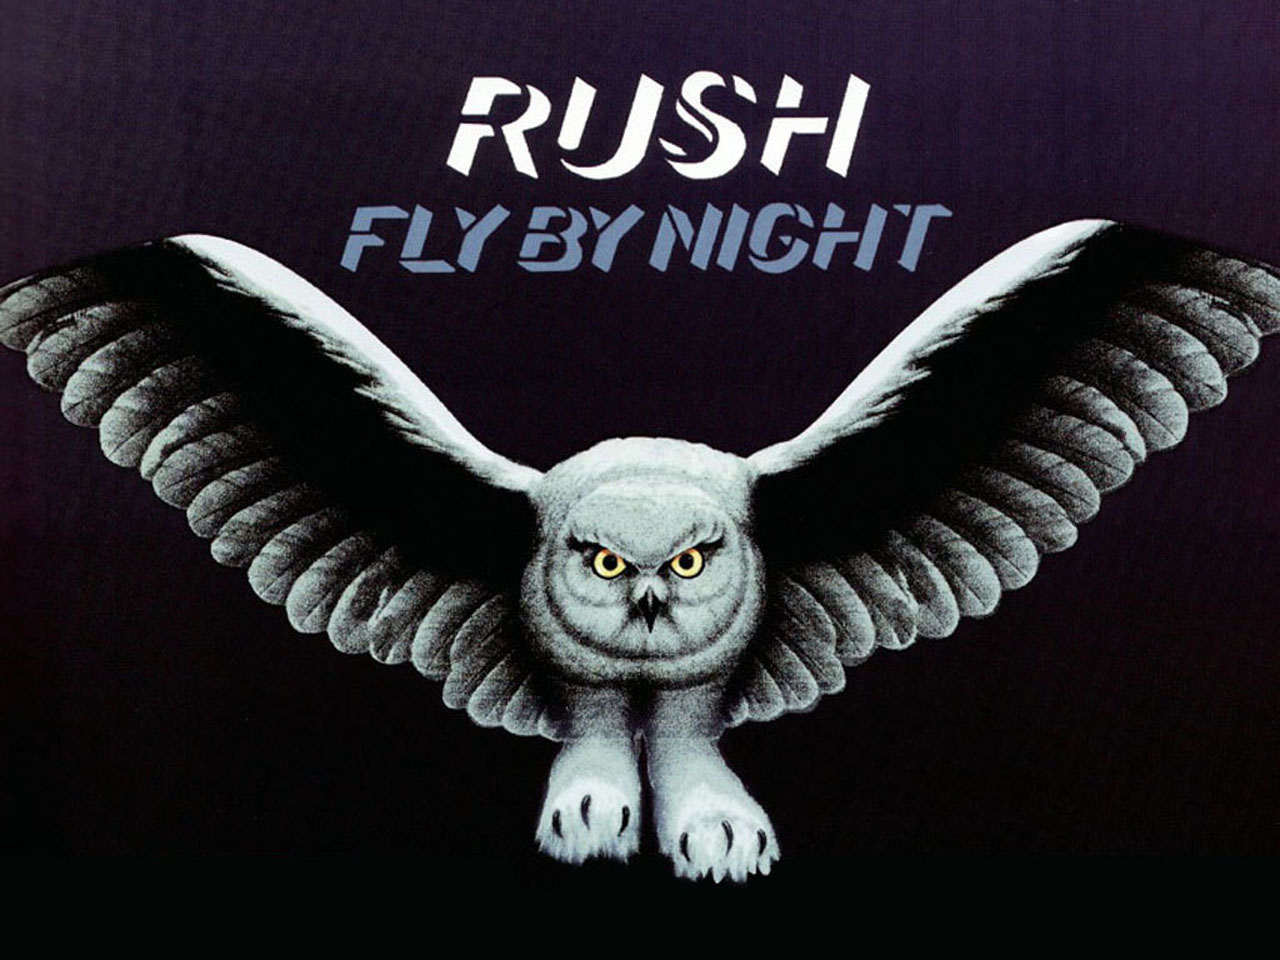 Artwork From A Fly By Night Tour Tshirt Later Included In The